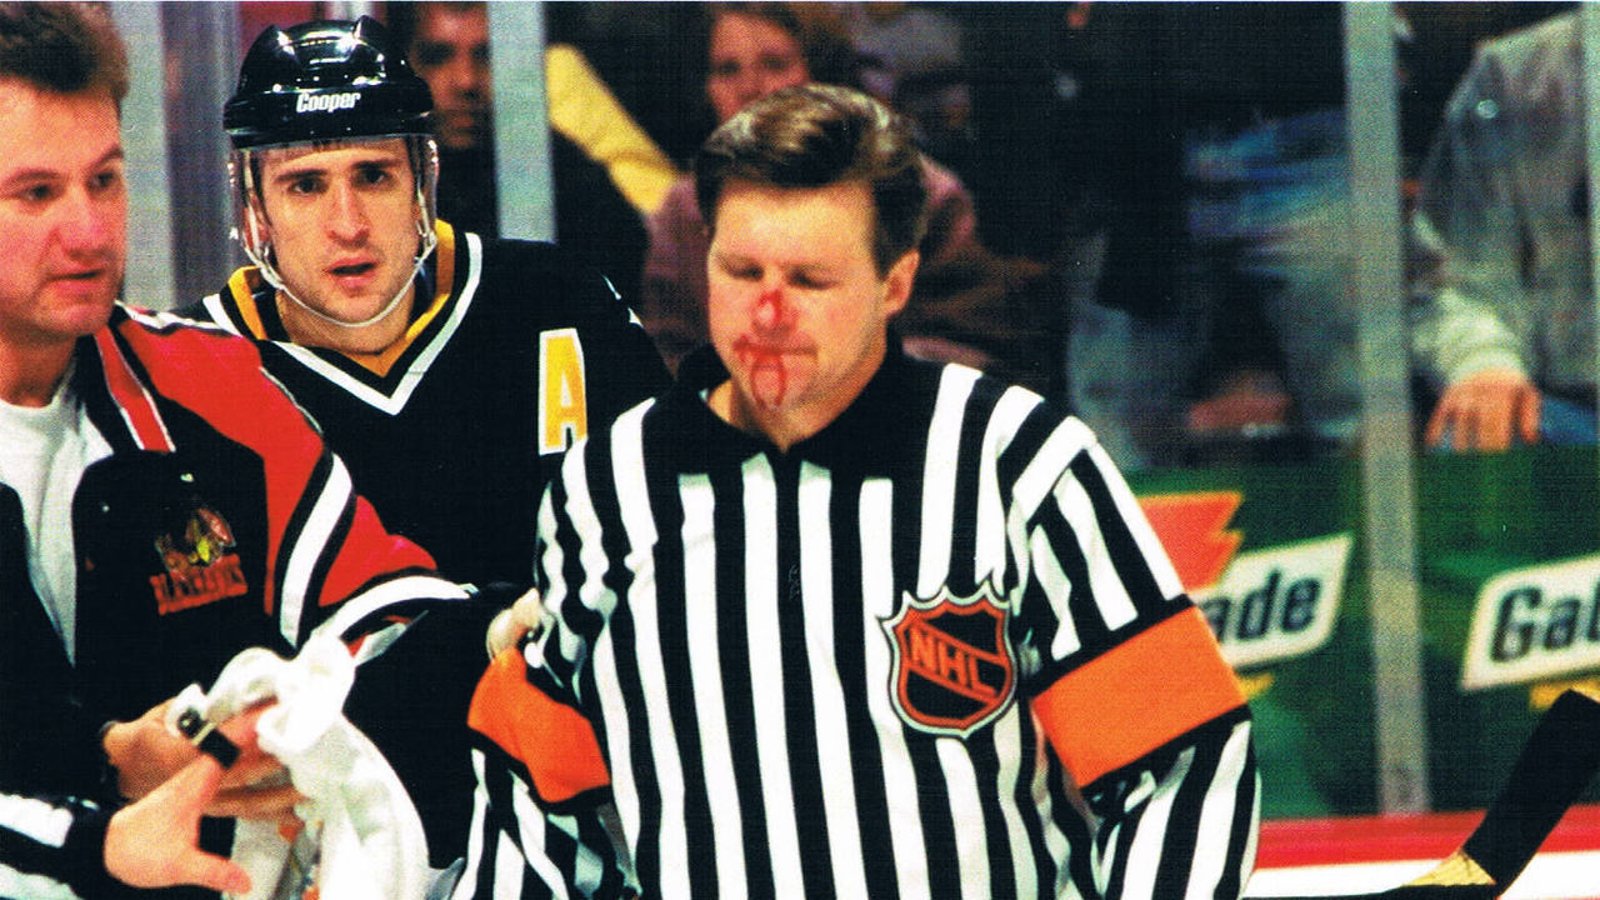 Kerry Fraser recalls how Theo Fleury once challenged him to a parking lot fight